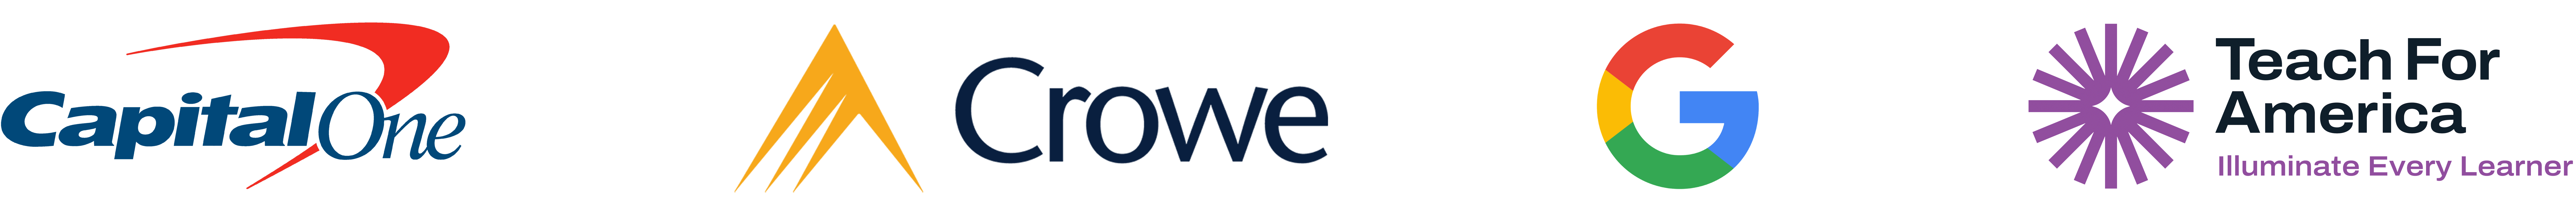 Logos for Capital One, Crowe LLP, Google, and Teach For America